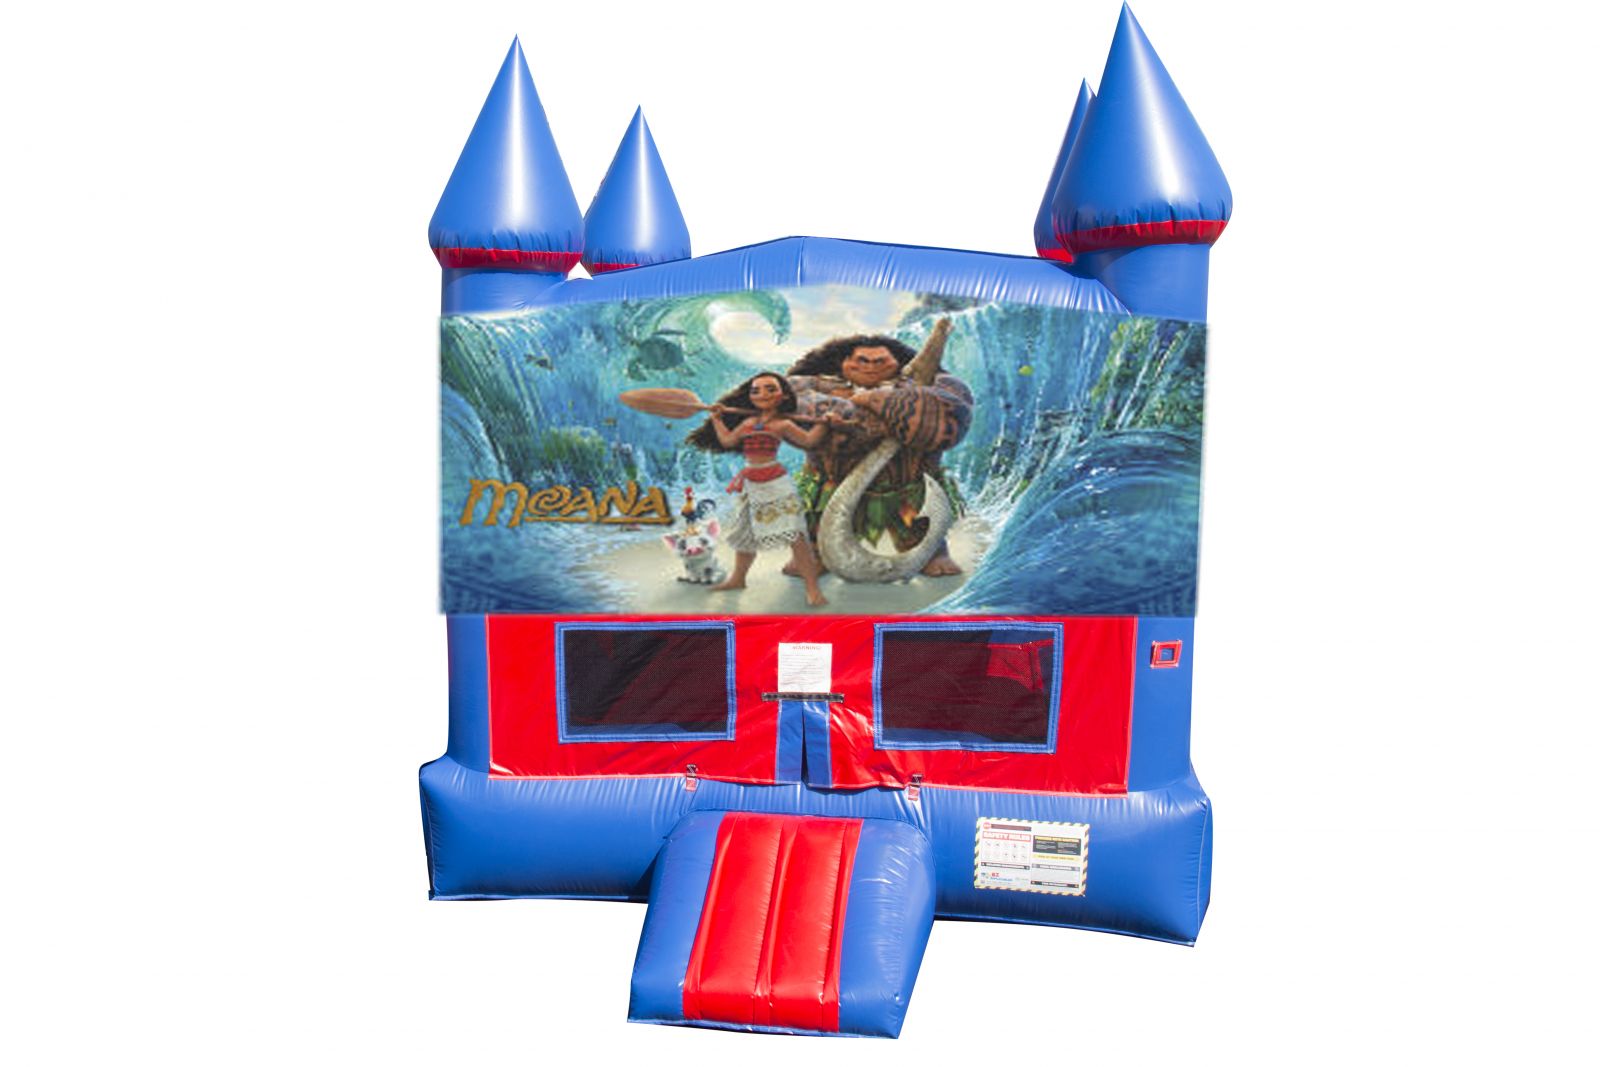 Moana Blue and Red Bounce House